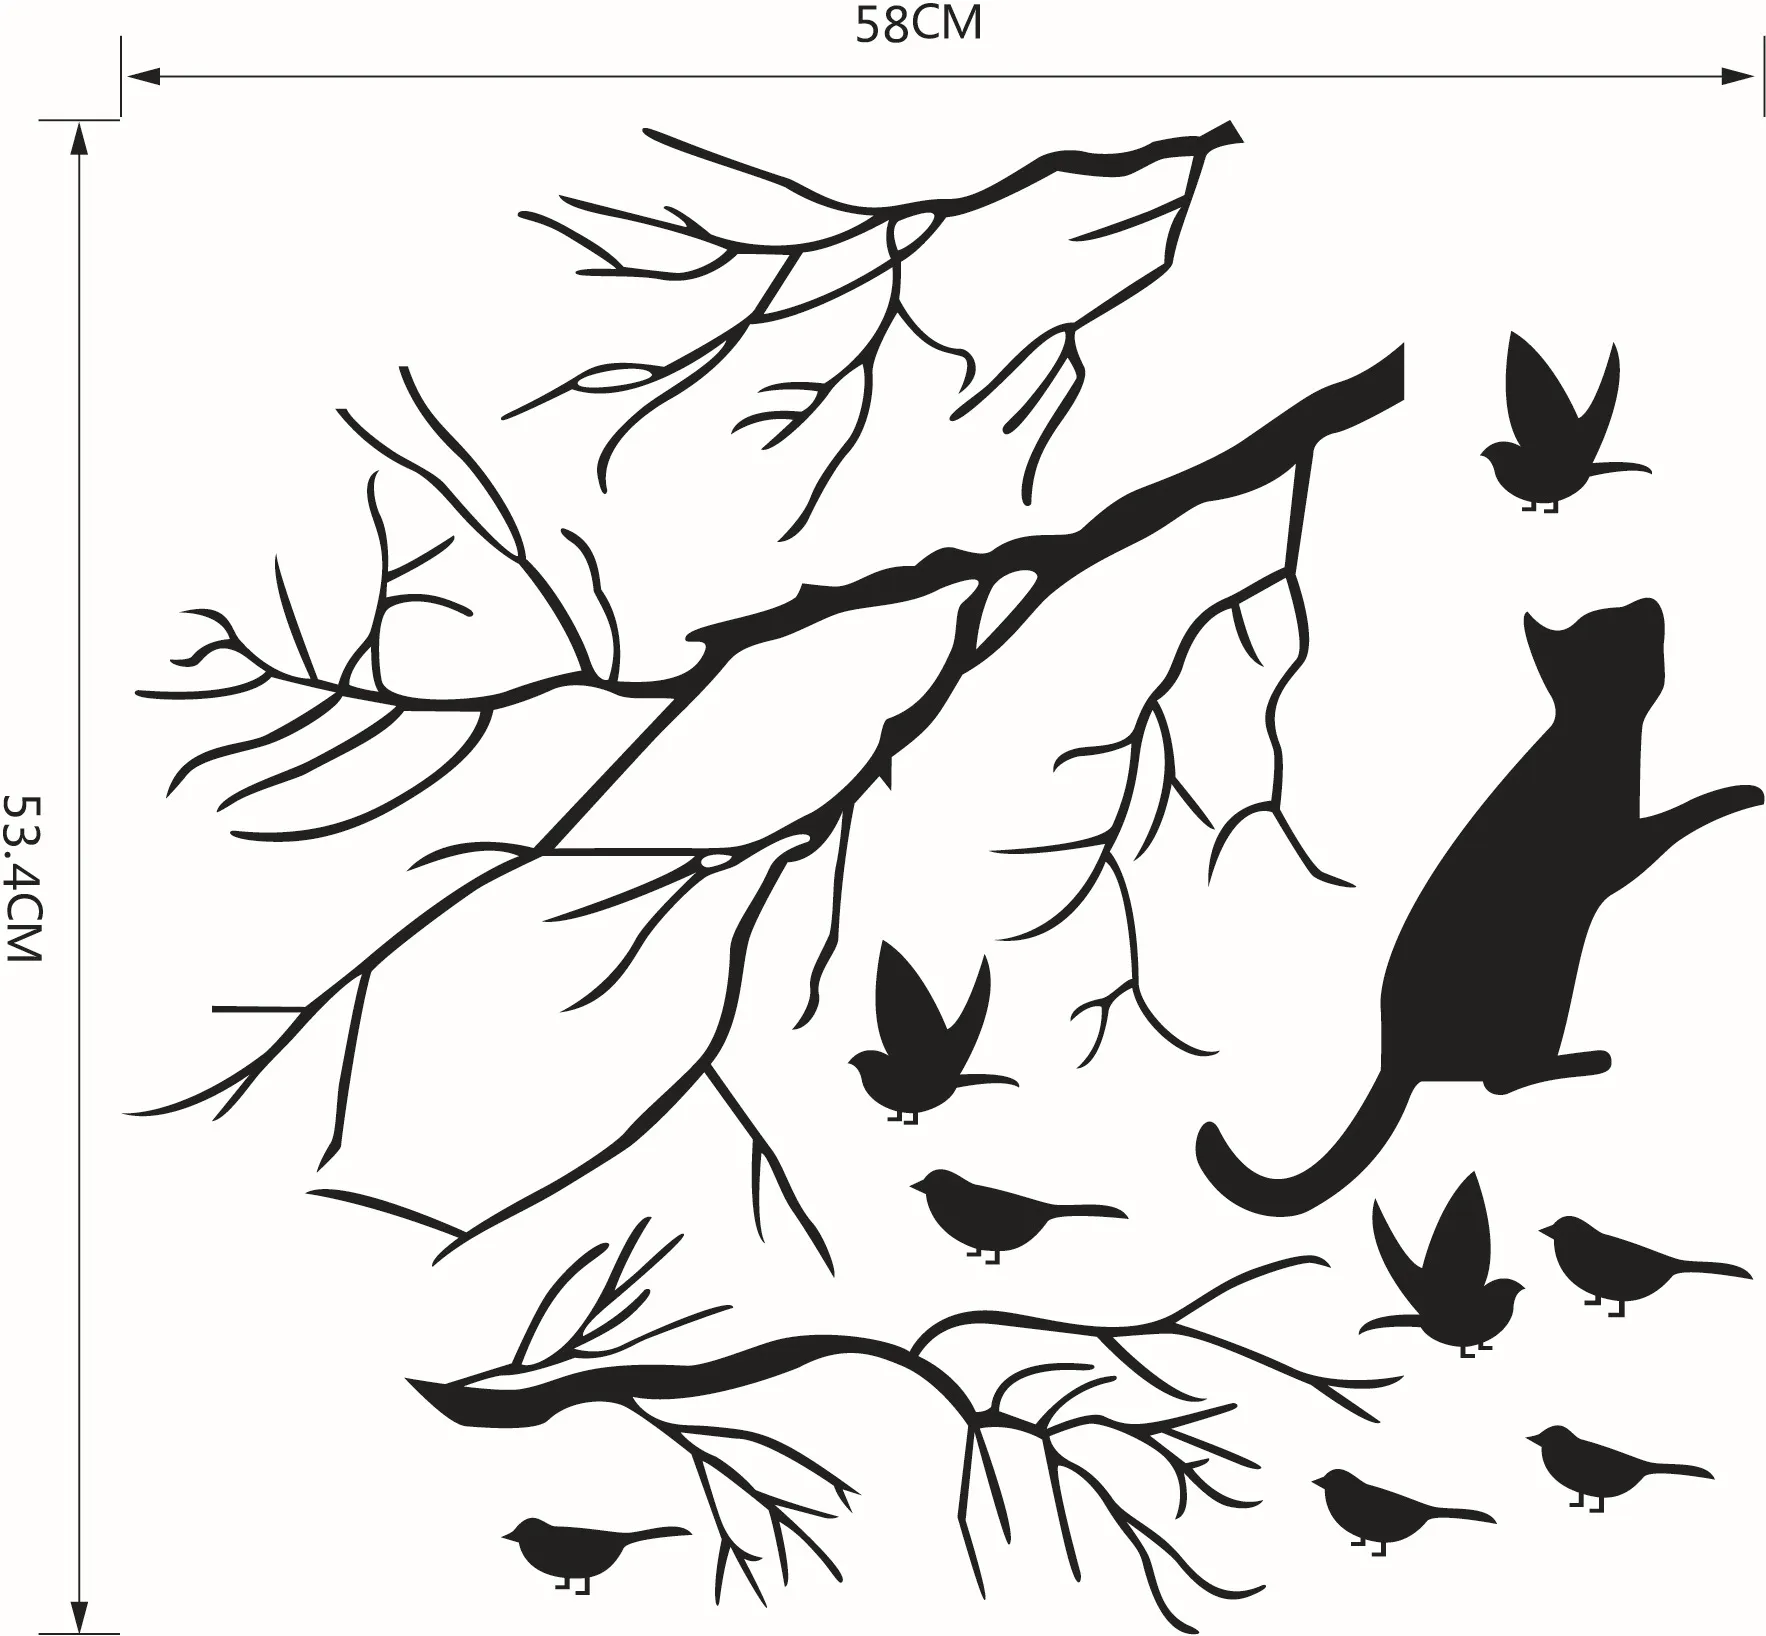 Cat Chasing the birds under the tree wall decal sticker Black Bird on the Tree Branch Wall Art Mural Poster Window Glass Wall Deco1154522